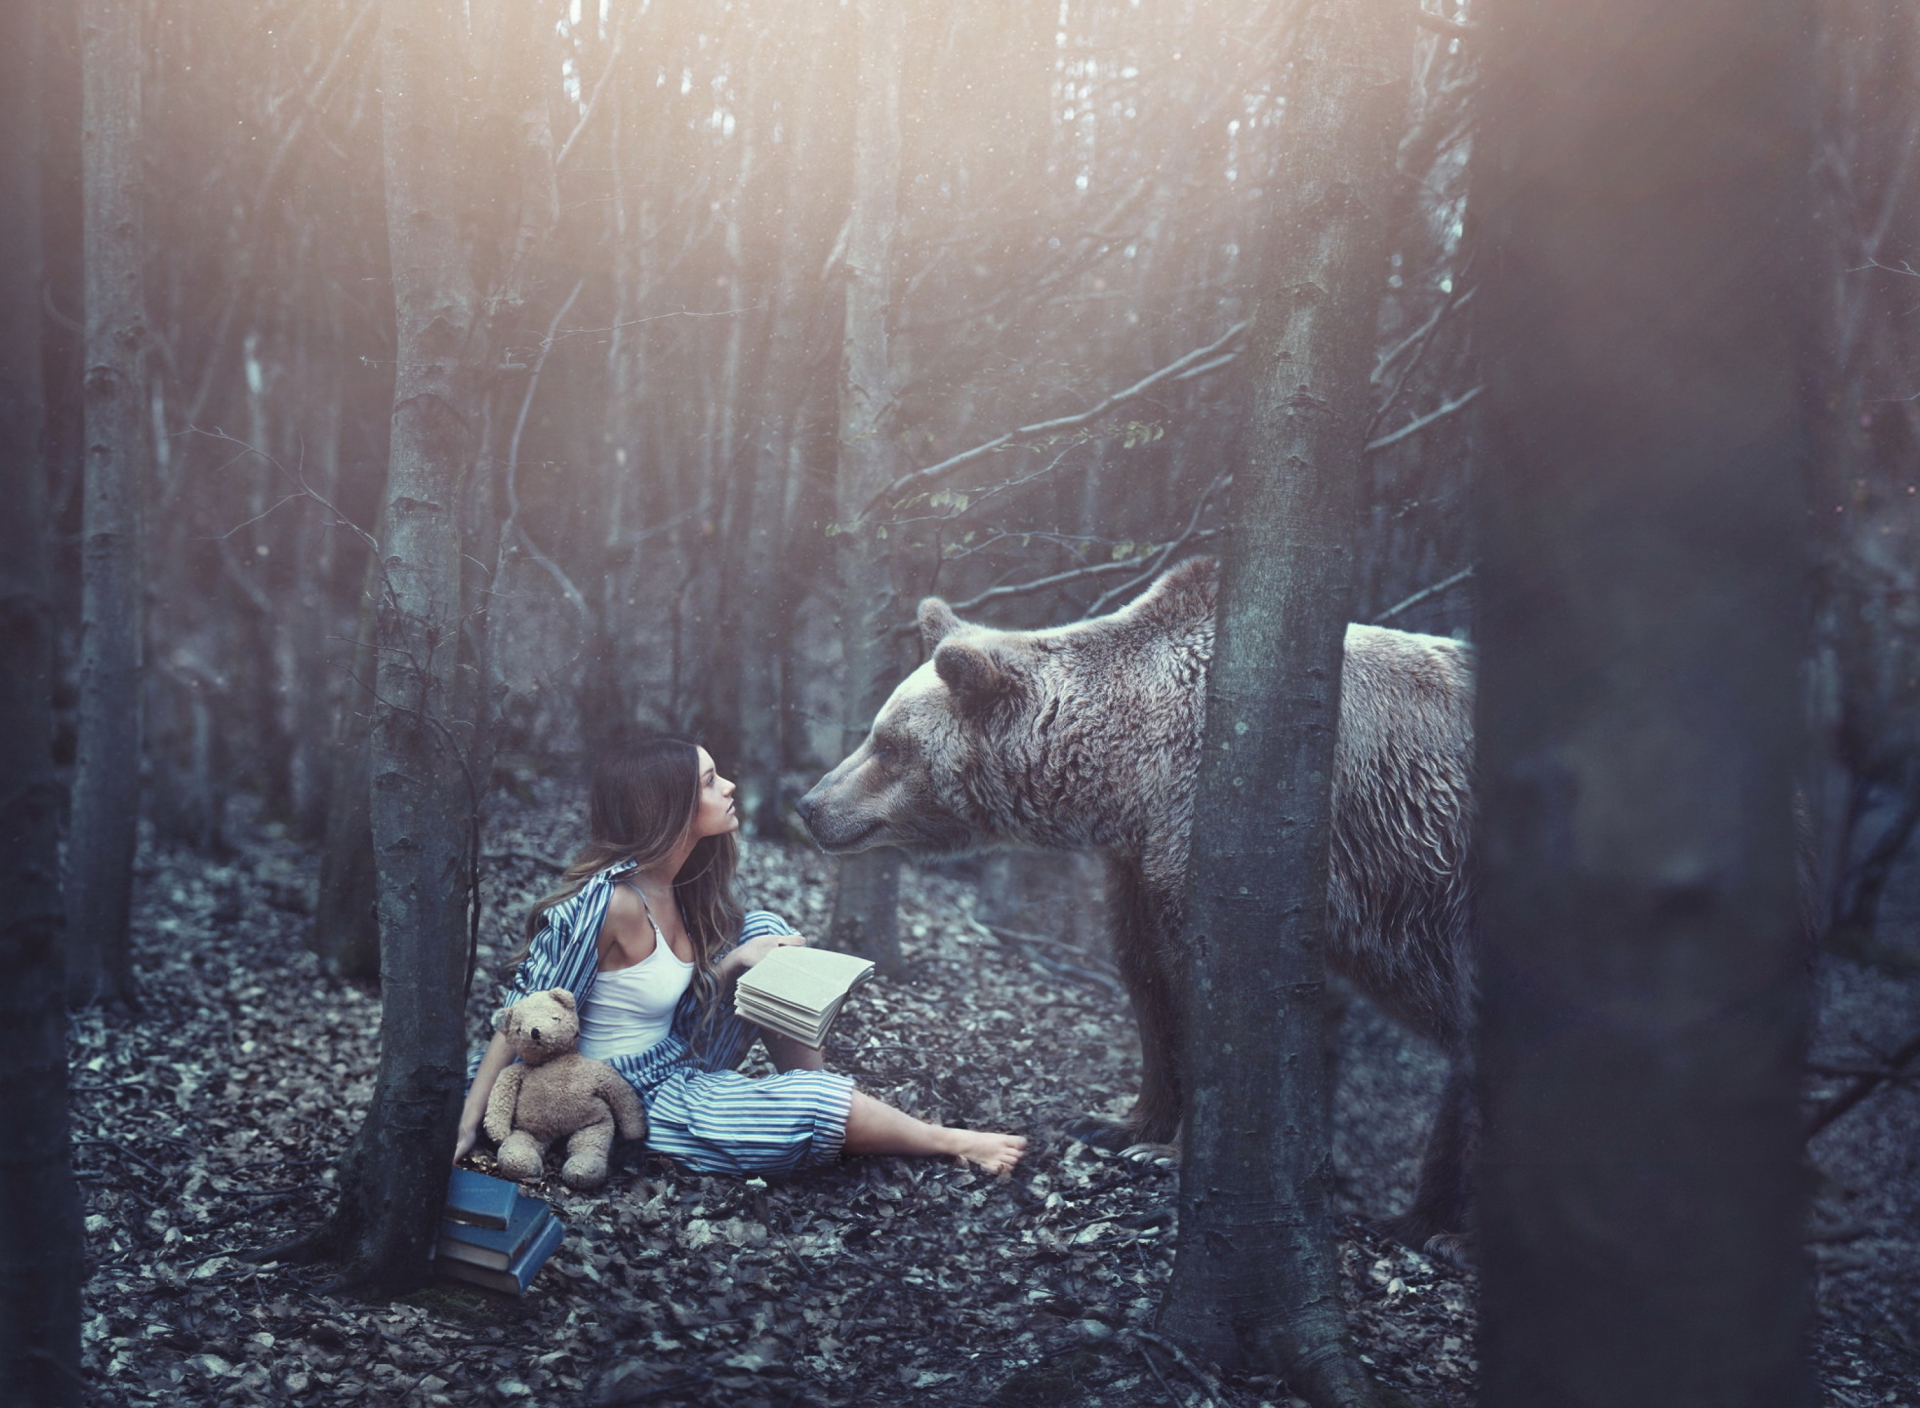 Girl And Two Bears In Forest By Rosie Hardy Photographer screenshot #1 1920x1408